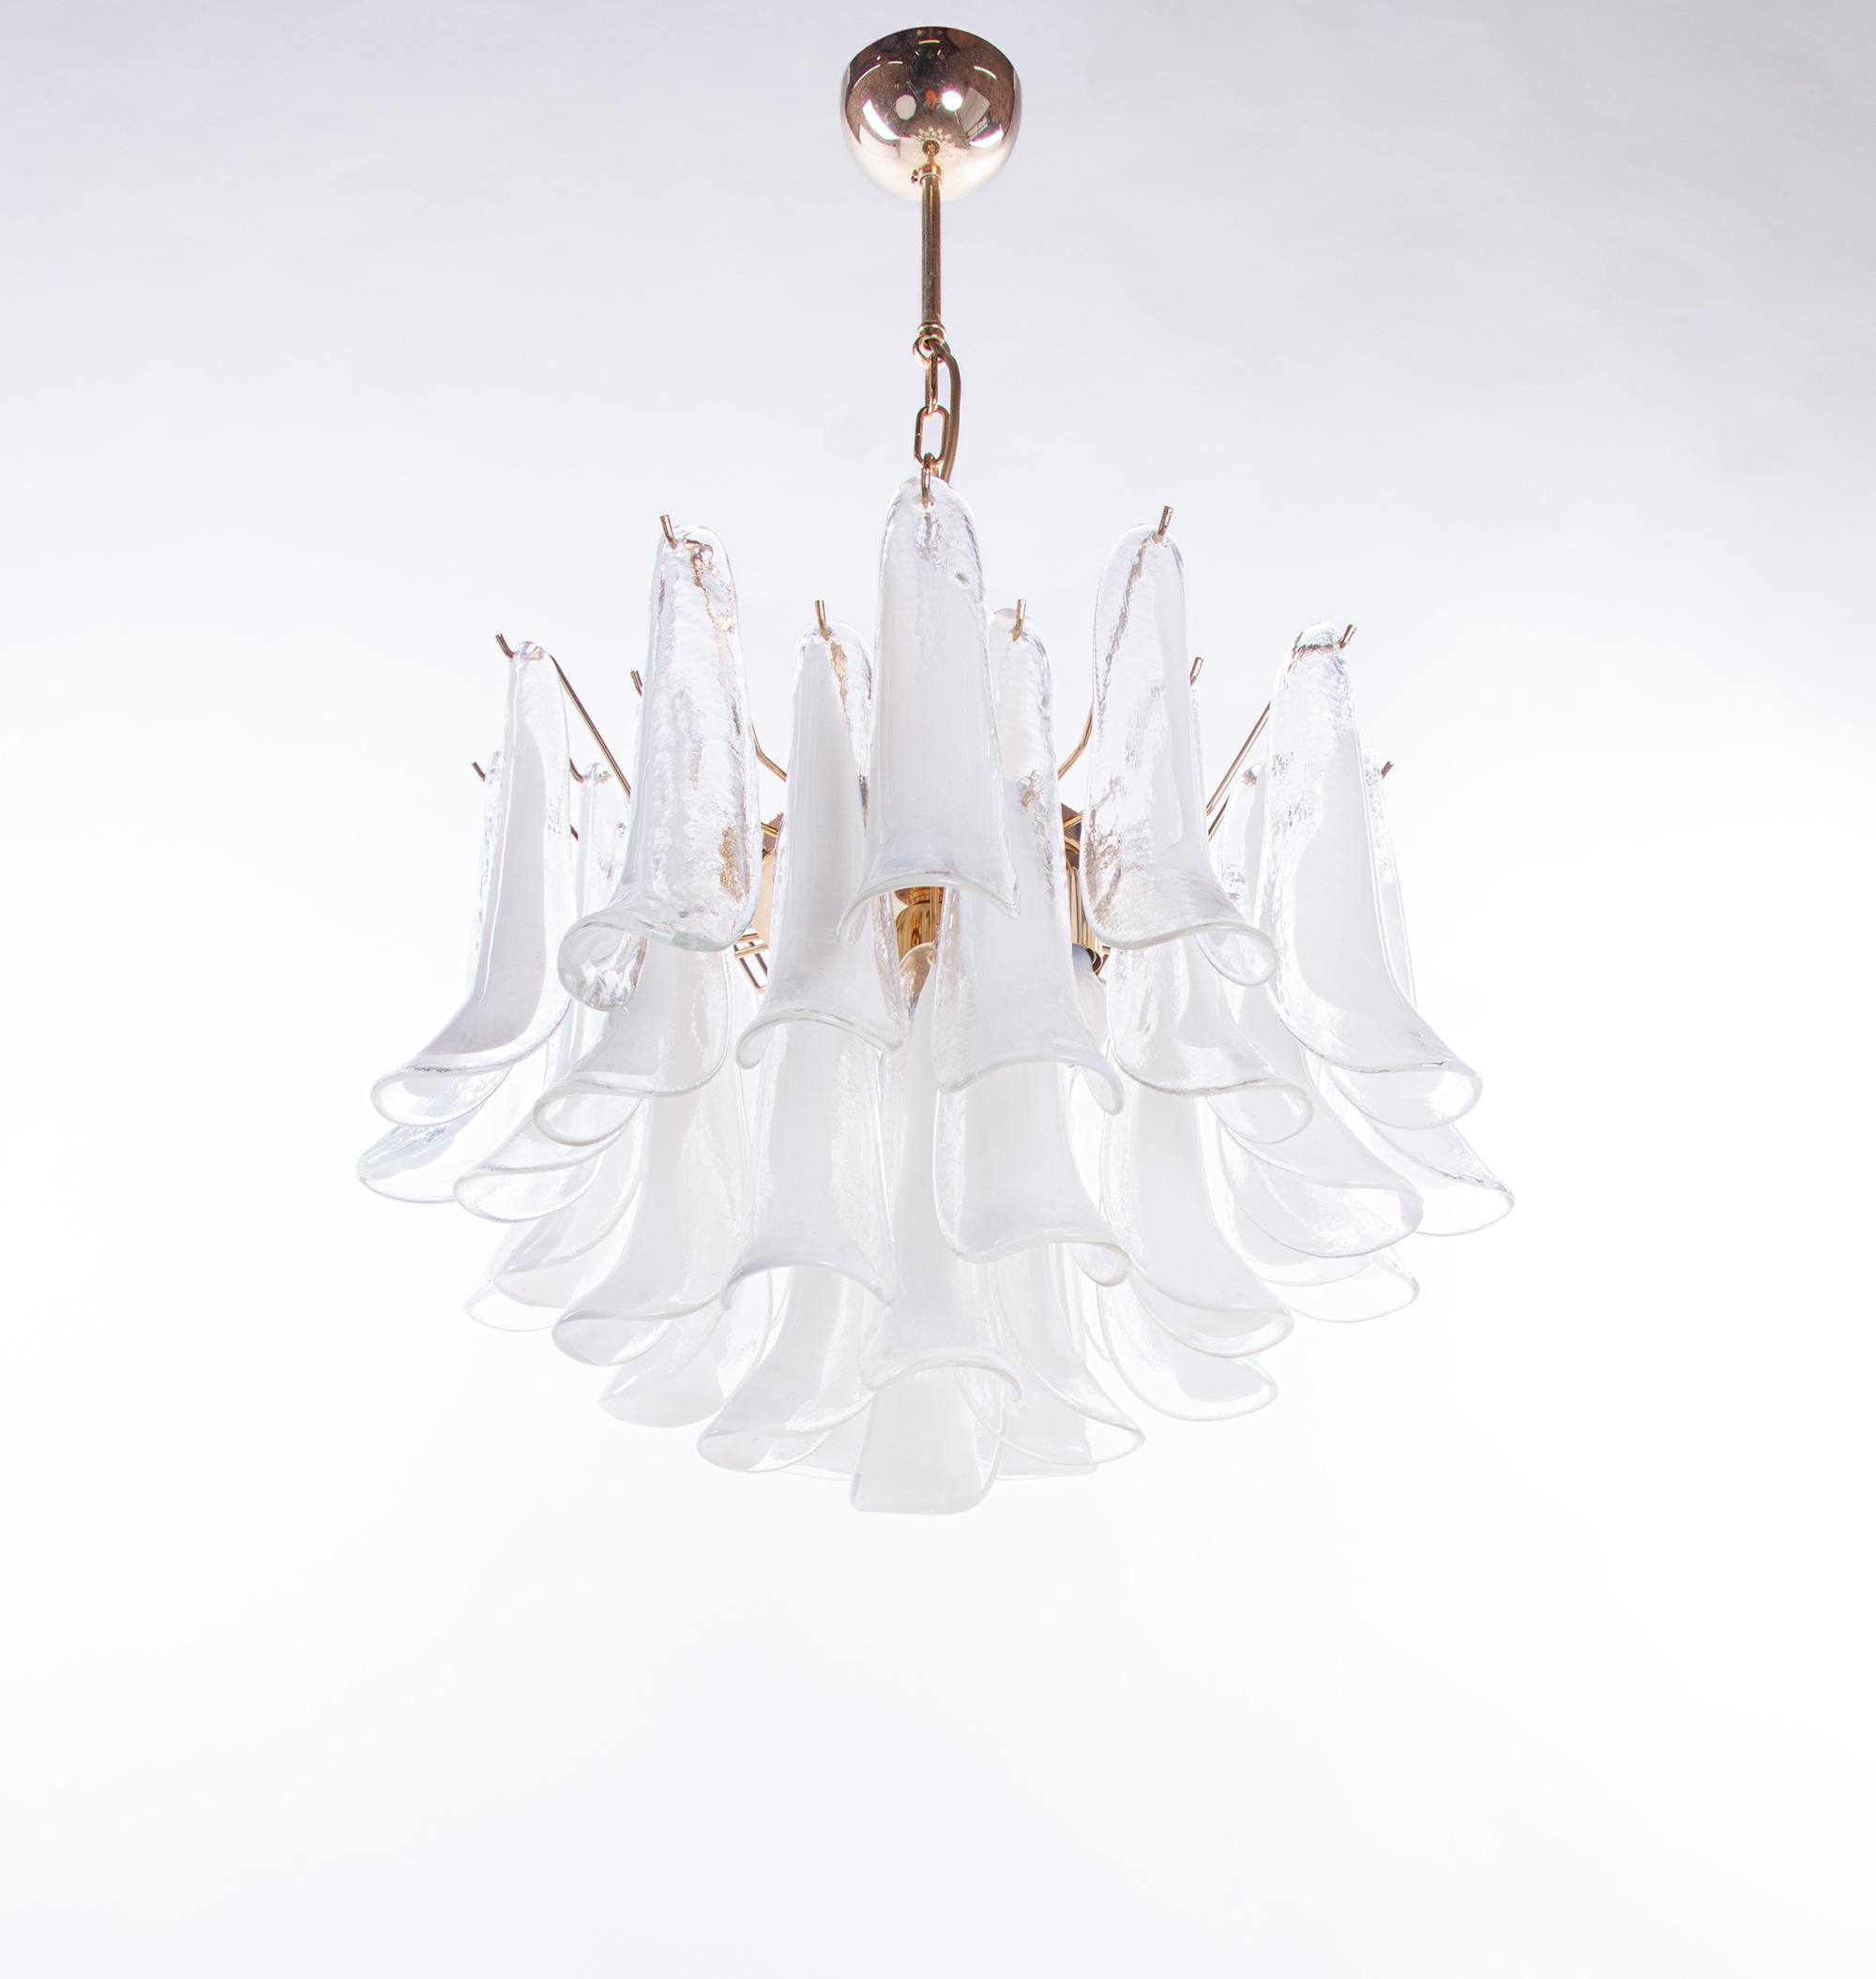 Elegant large vintage chandelier with 36 white and clear hand blown Murano glass petals on a golden frame. Each lamp petal is unique and partially marked with an 